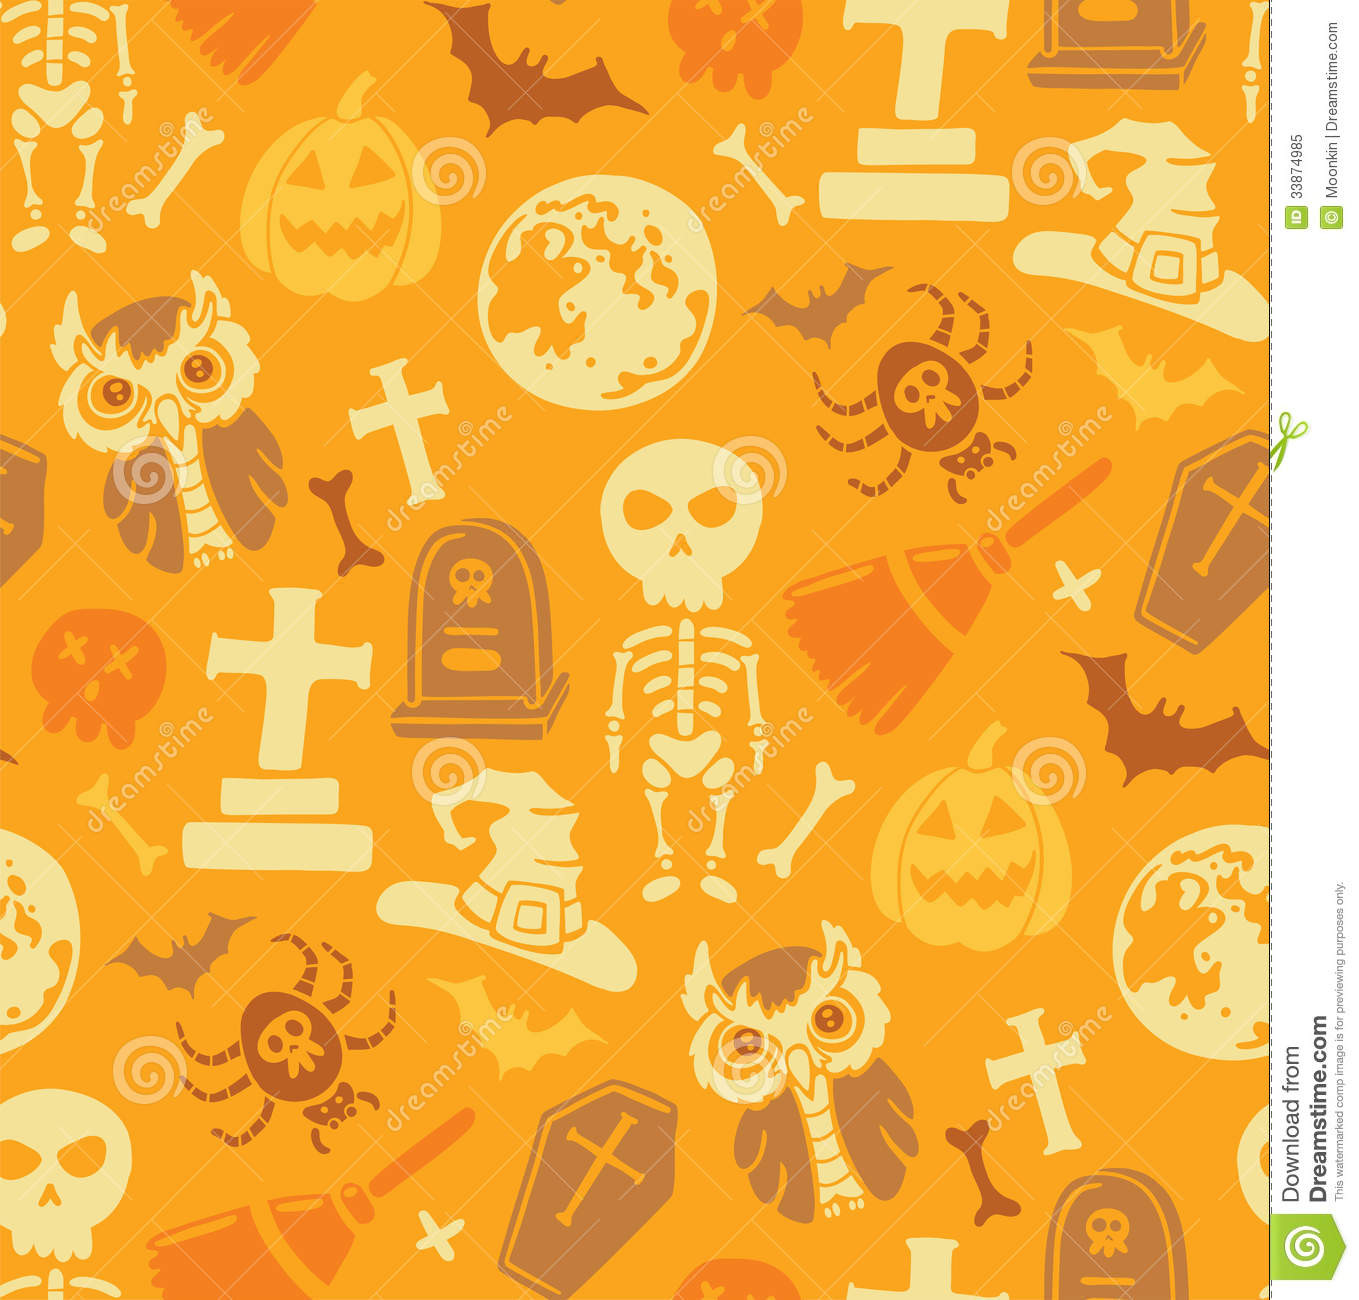 Halloween Tile Background
 Seamless Pattern With Halloween Objects Stock Vector